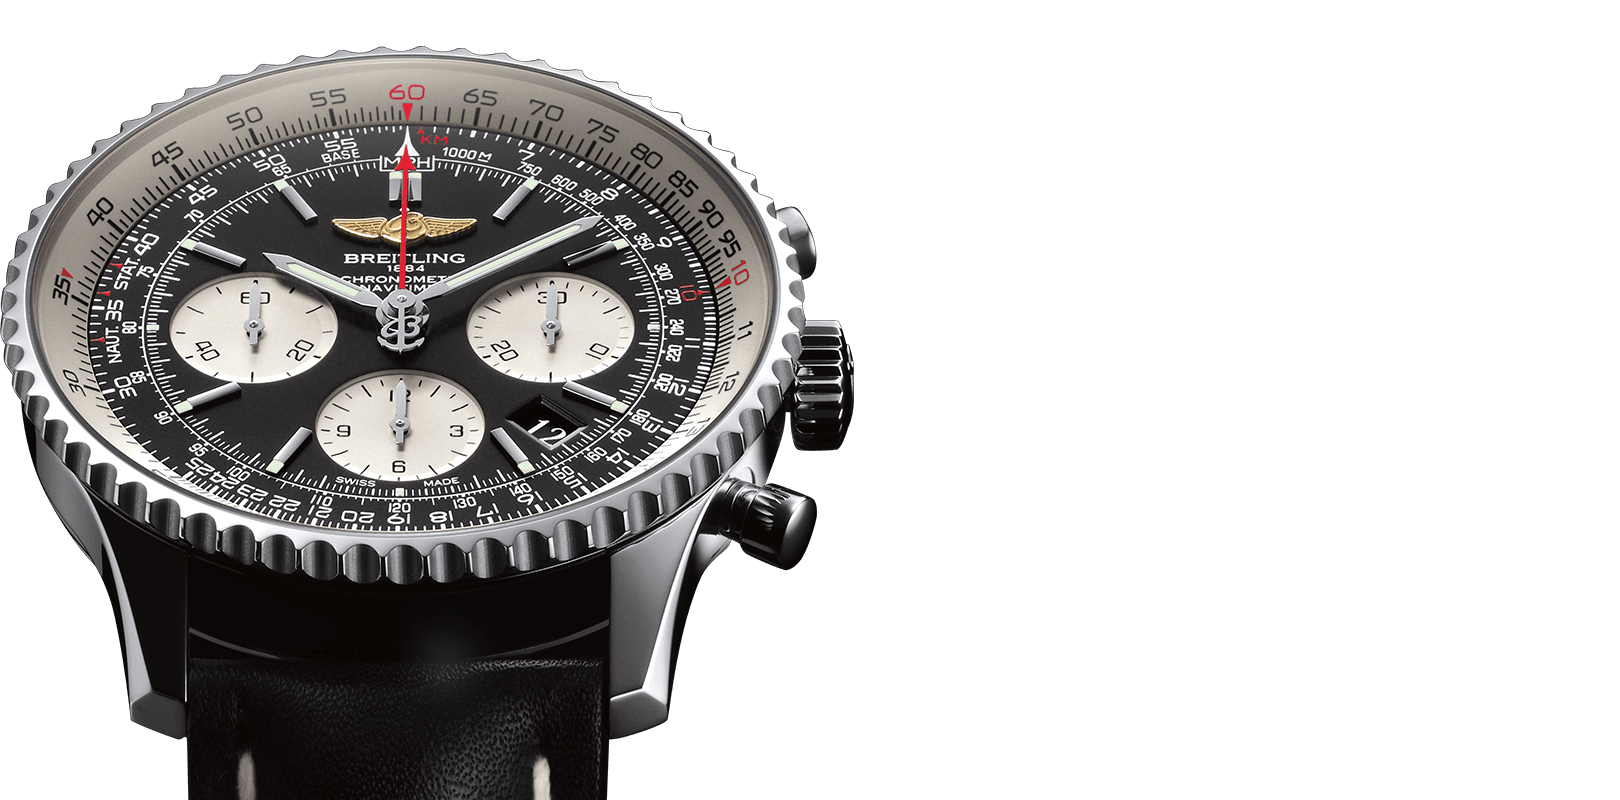 breitling Professional Exospace B55 Quartz Movement FlyBack, Chronometer, Digital Display, Personal Positioning Lighthouse, End of Life Indicator, Countdown